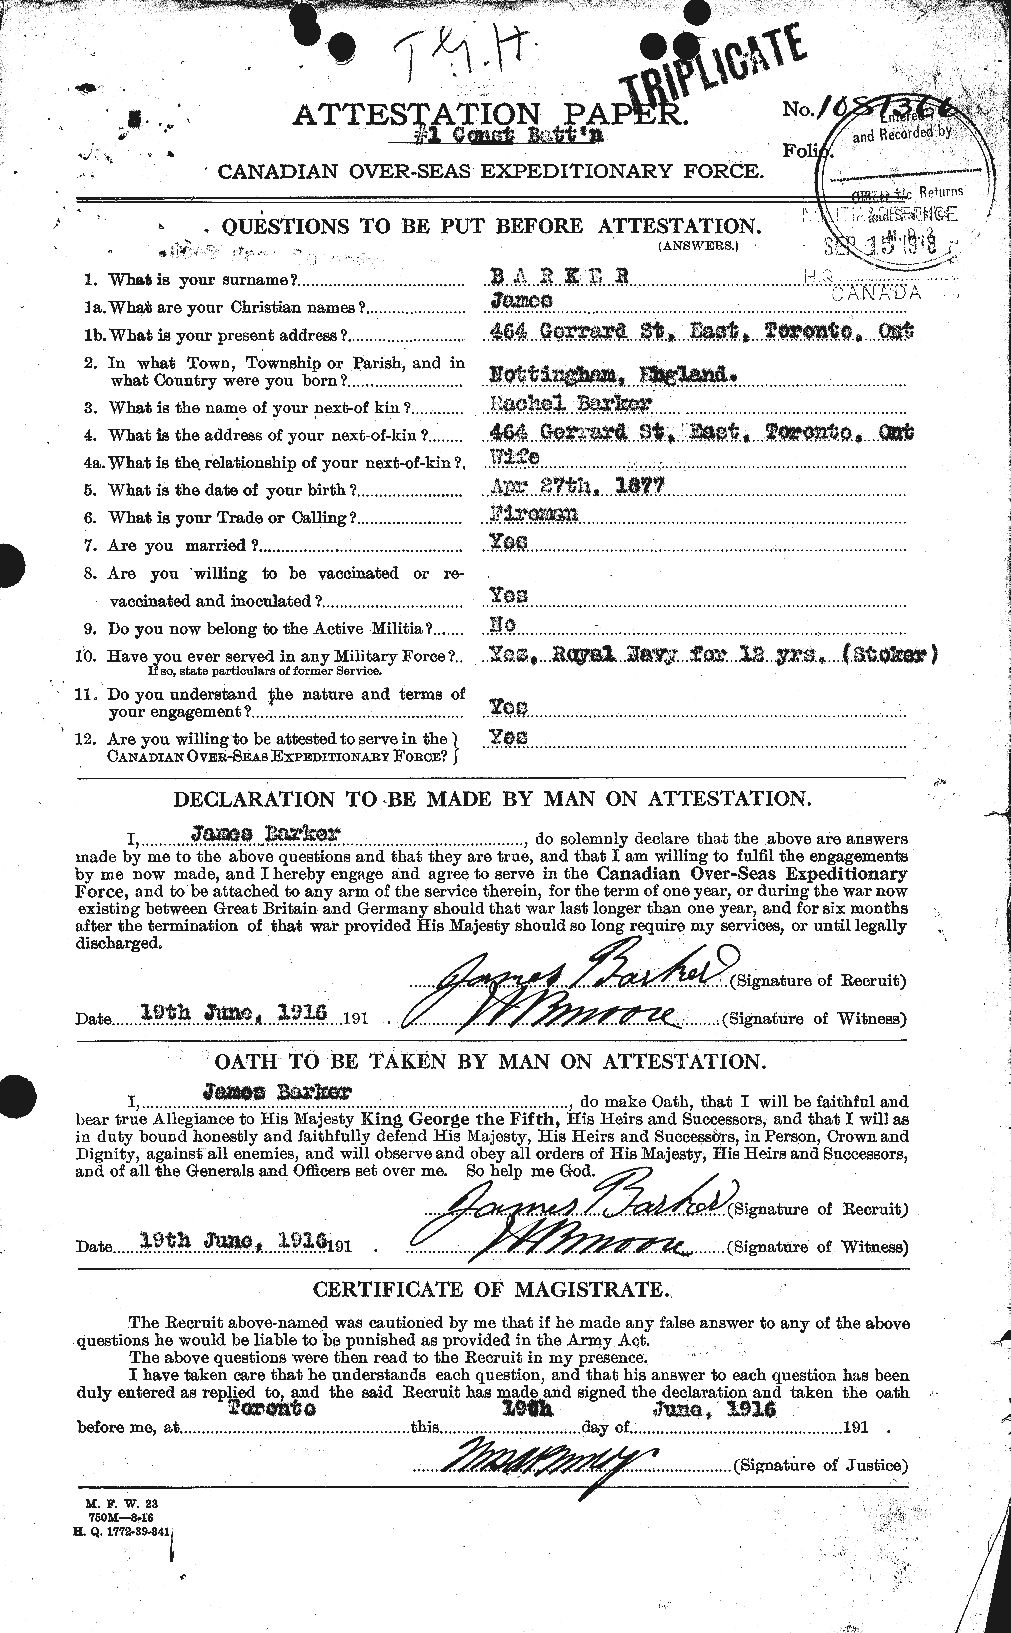 Personnel Records of the First World War - CEF 227484a